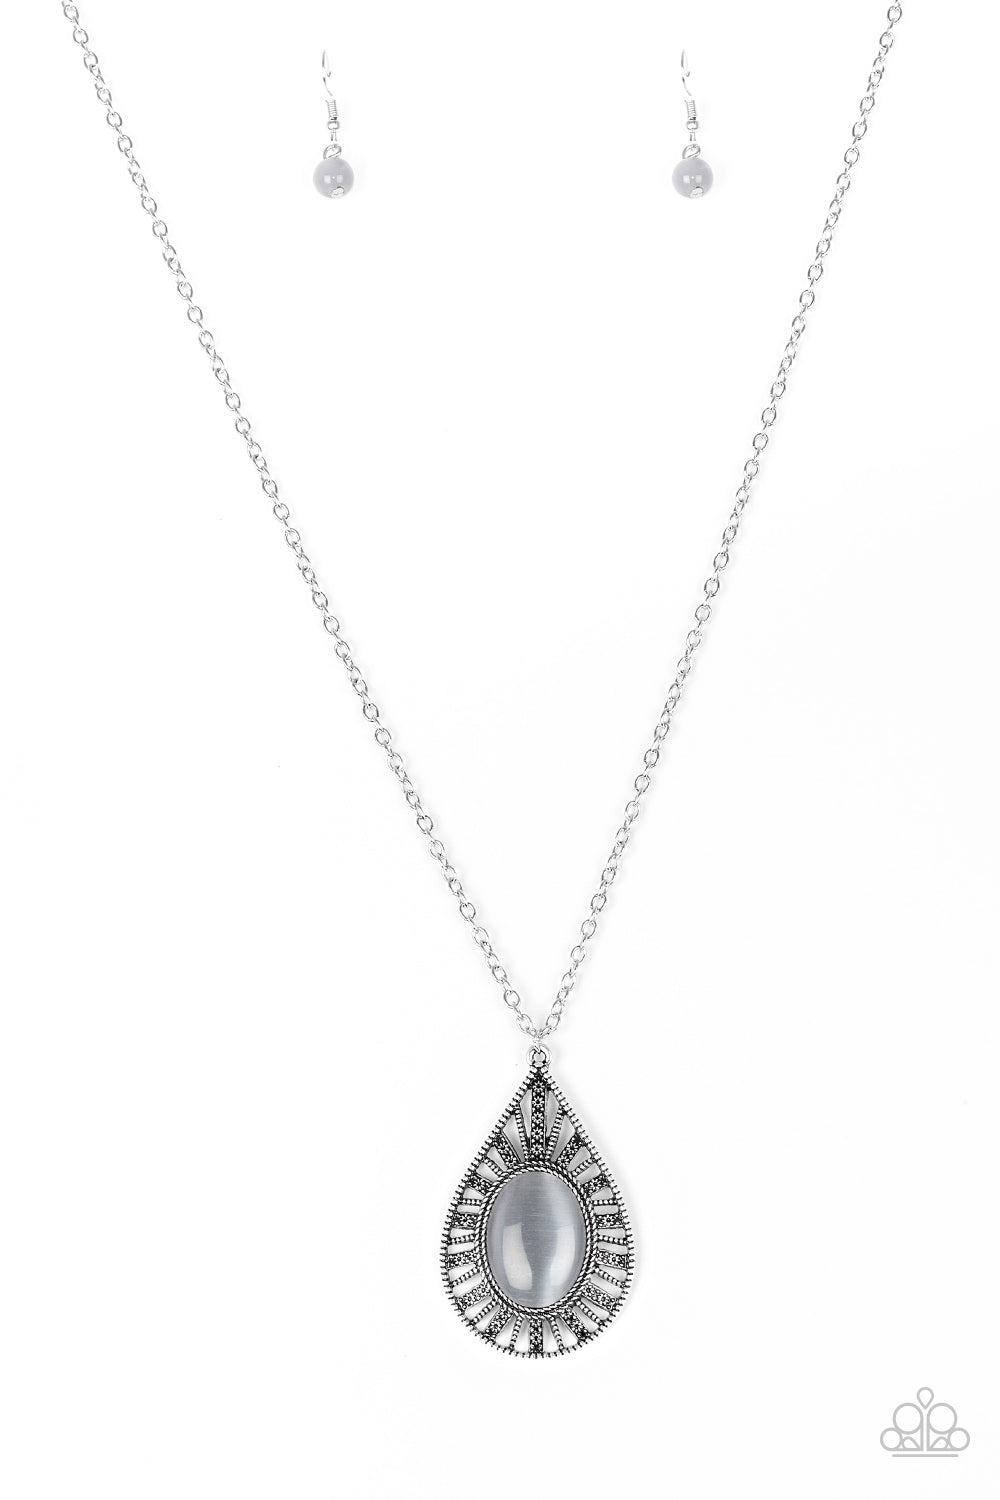 Total Tranquility - silver - Paparazzi necklace